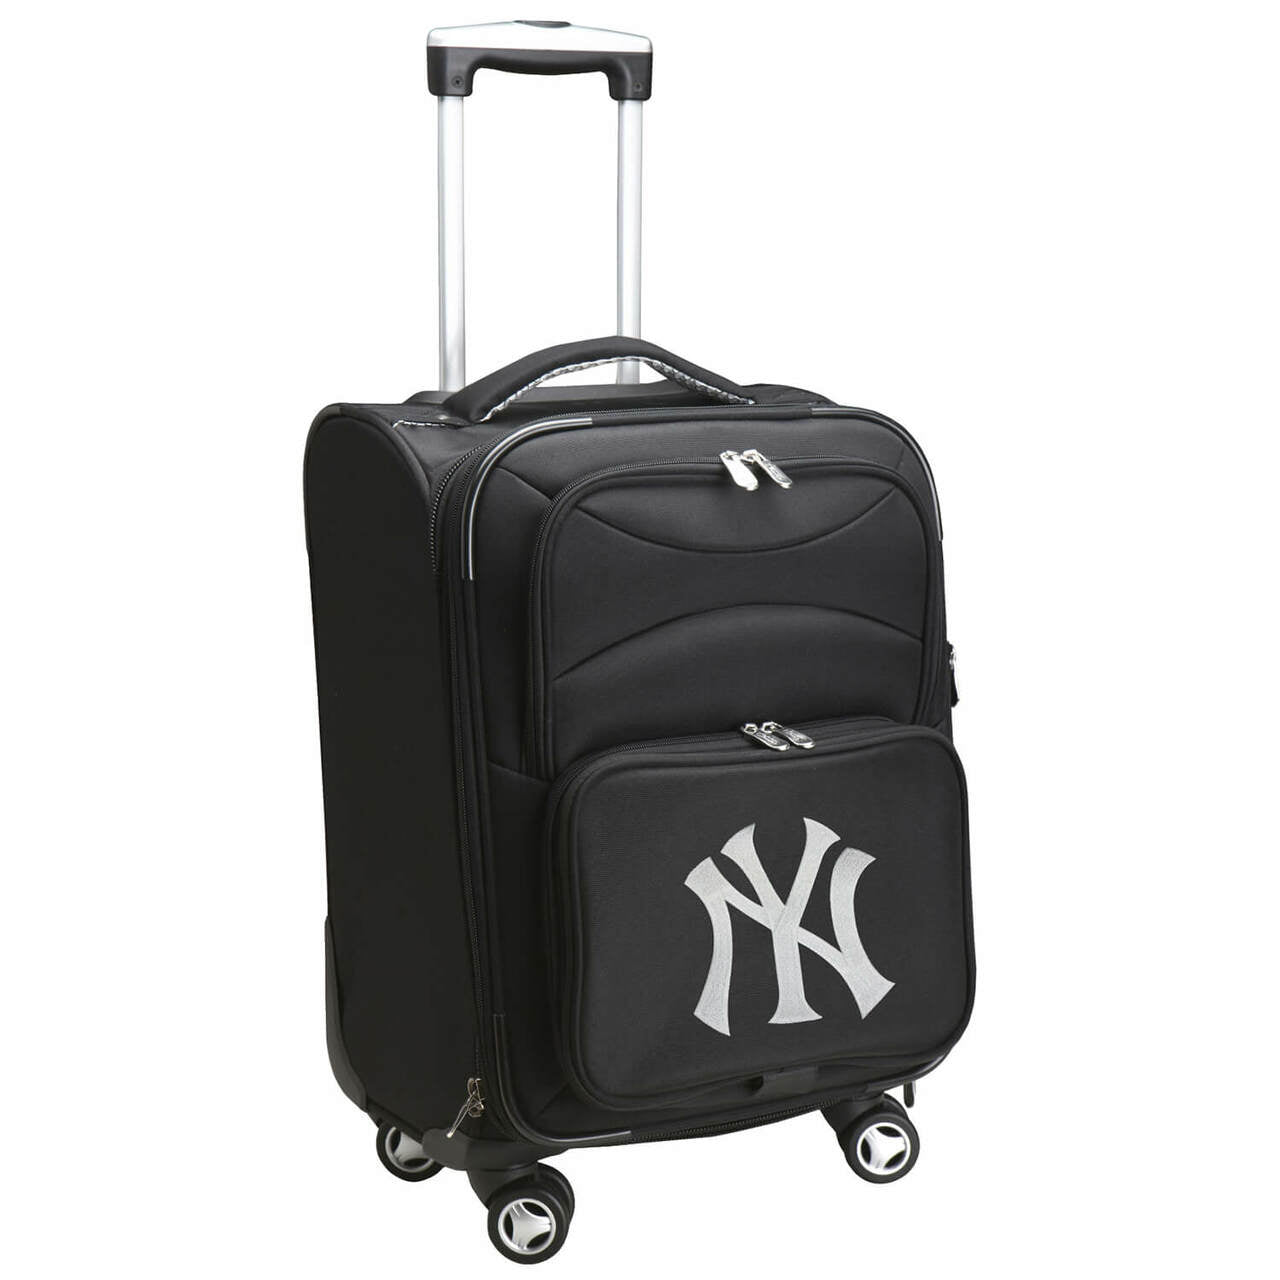 New York Yankees 21" Carry-on Spinner Luggage